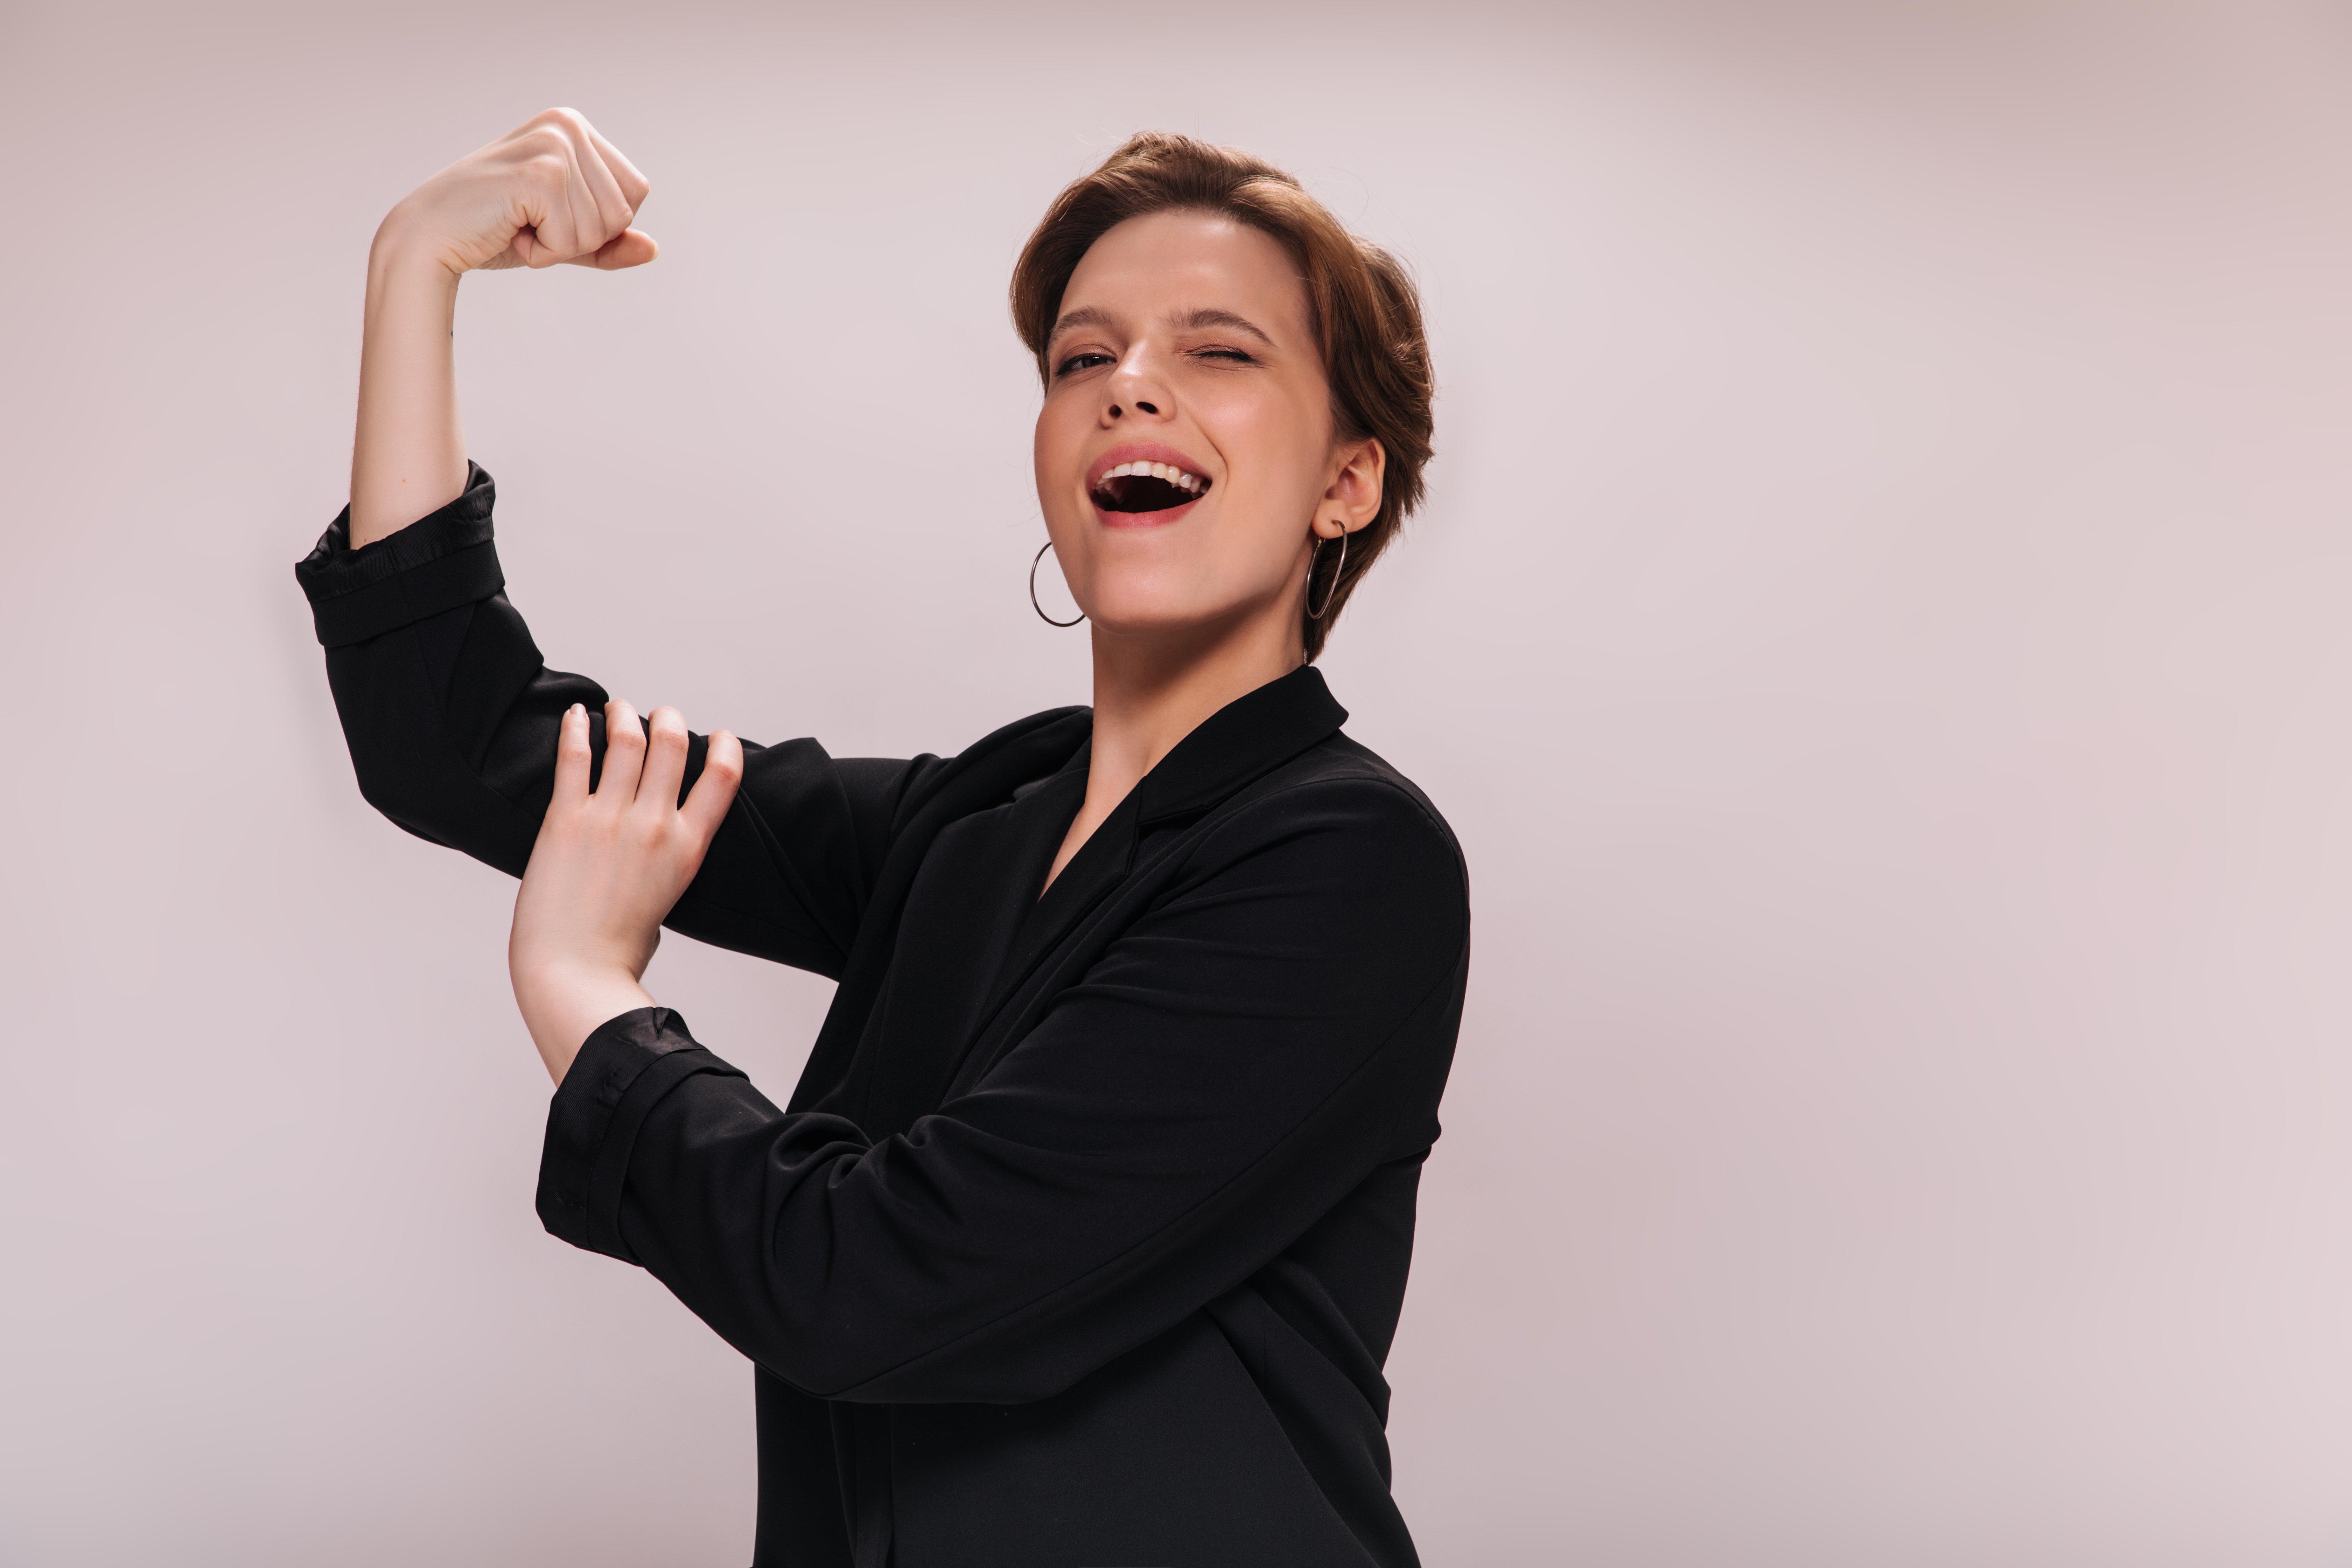 woman-rejoices-her-power-demonstrates-her-biceps-charming-lady-black-jacket-smiles-shows-muscles-isolated-background